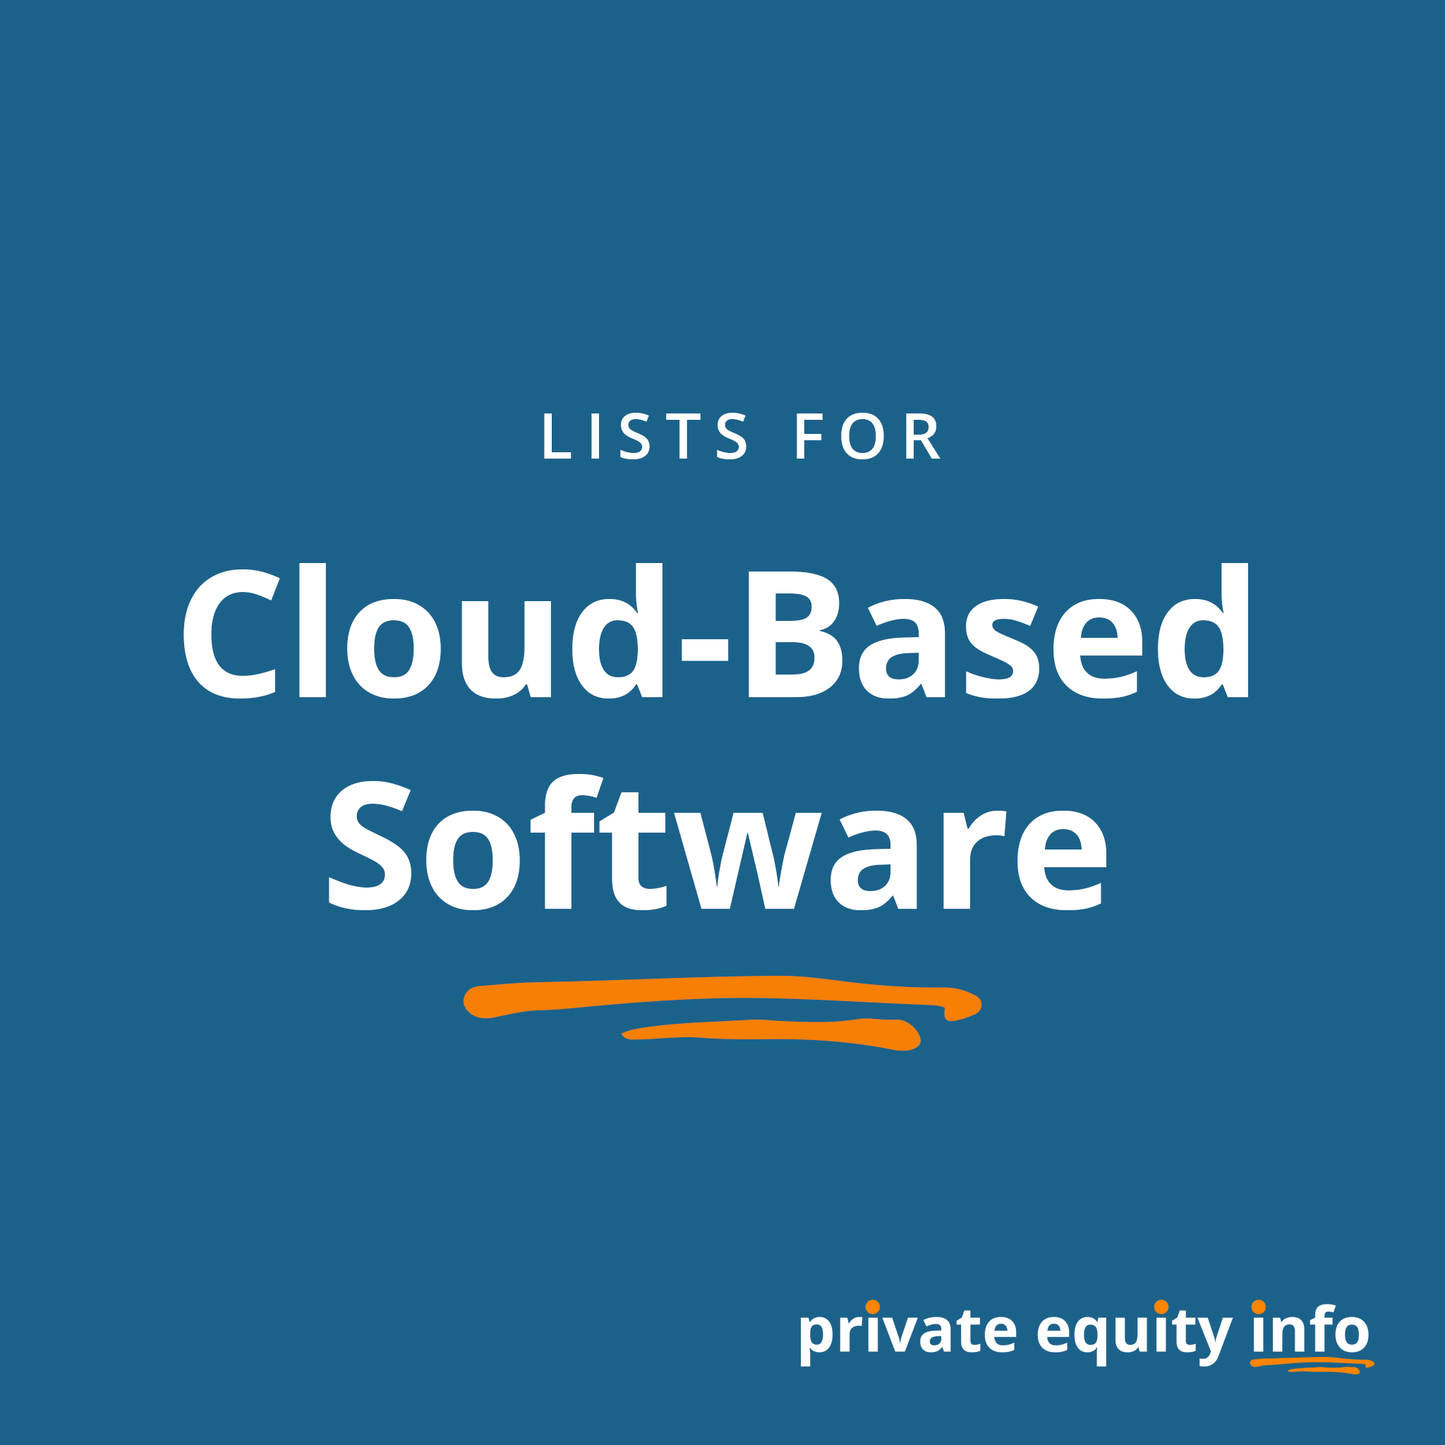 List of Private Equity Firms in Cloud-Based Software